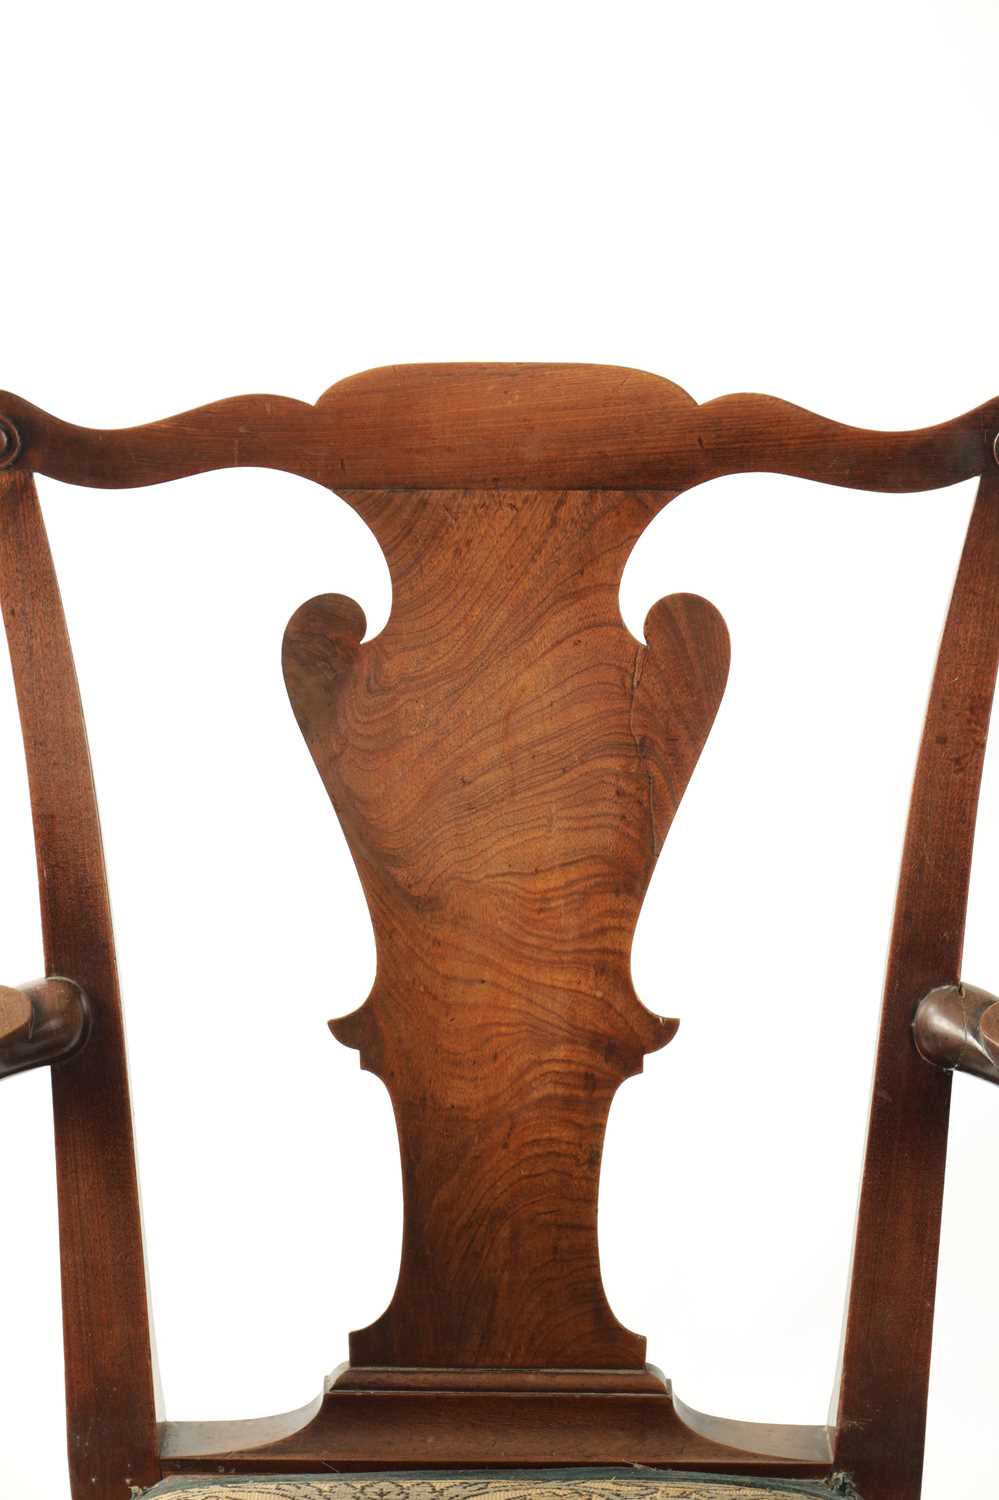 AN 18TH CENTURY FIGURED MAHOGANY COMMODE CHAIR - Image 5 of 6